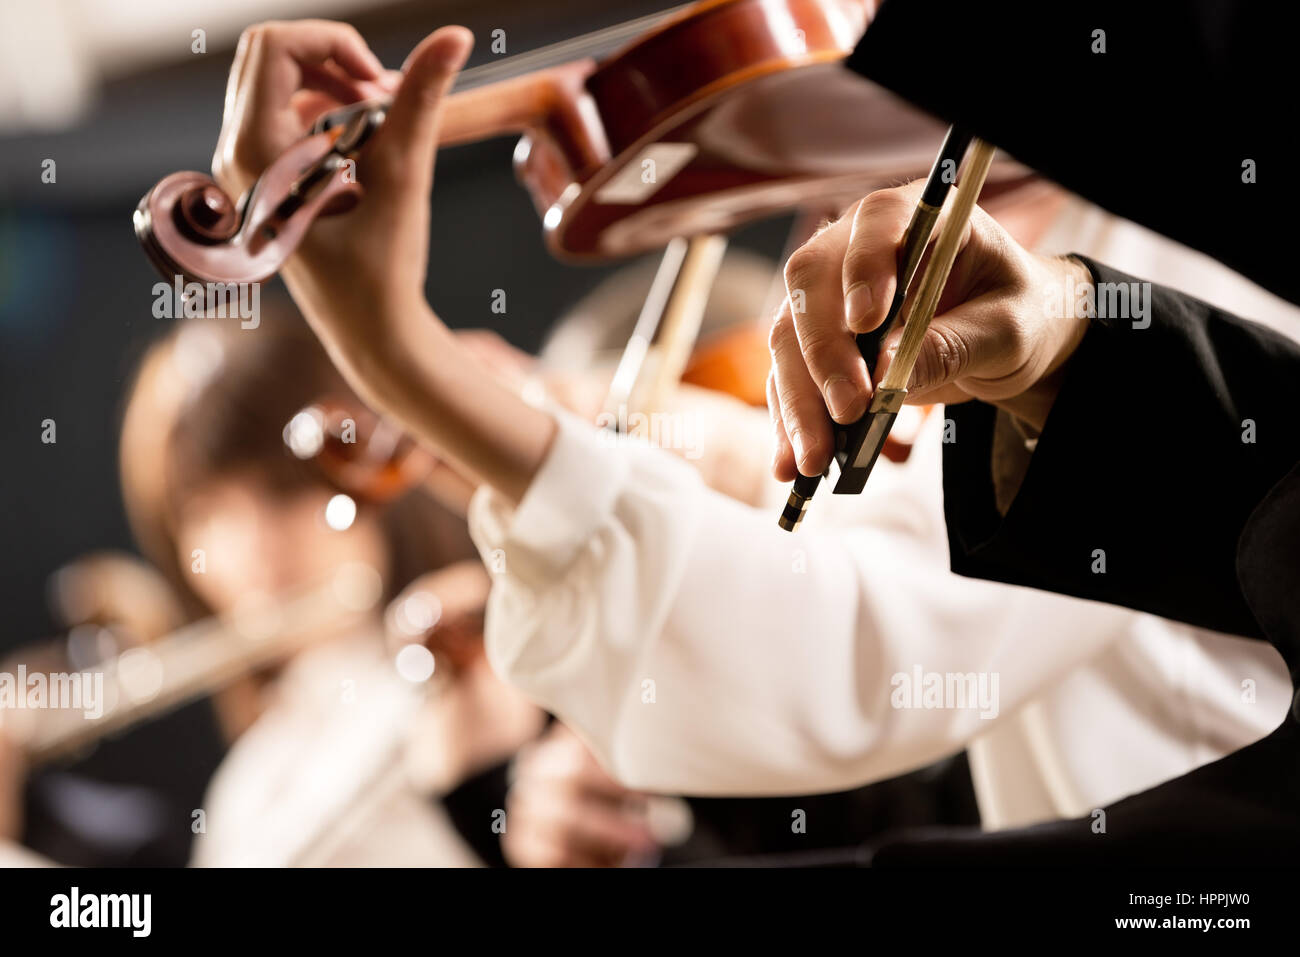 Elegant violin players, hands close-up and orchestra on background. Stock Photo